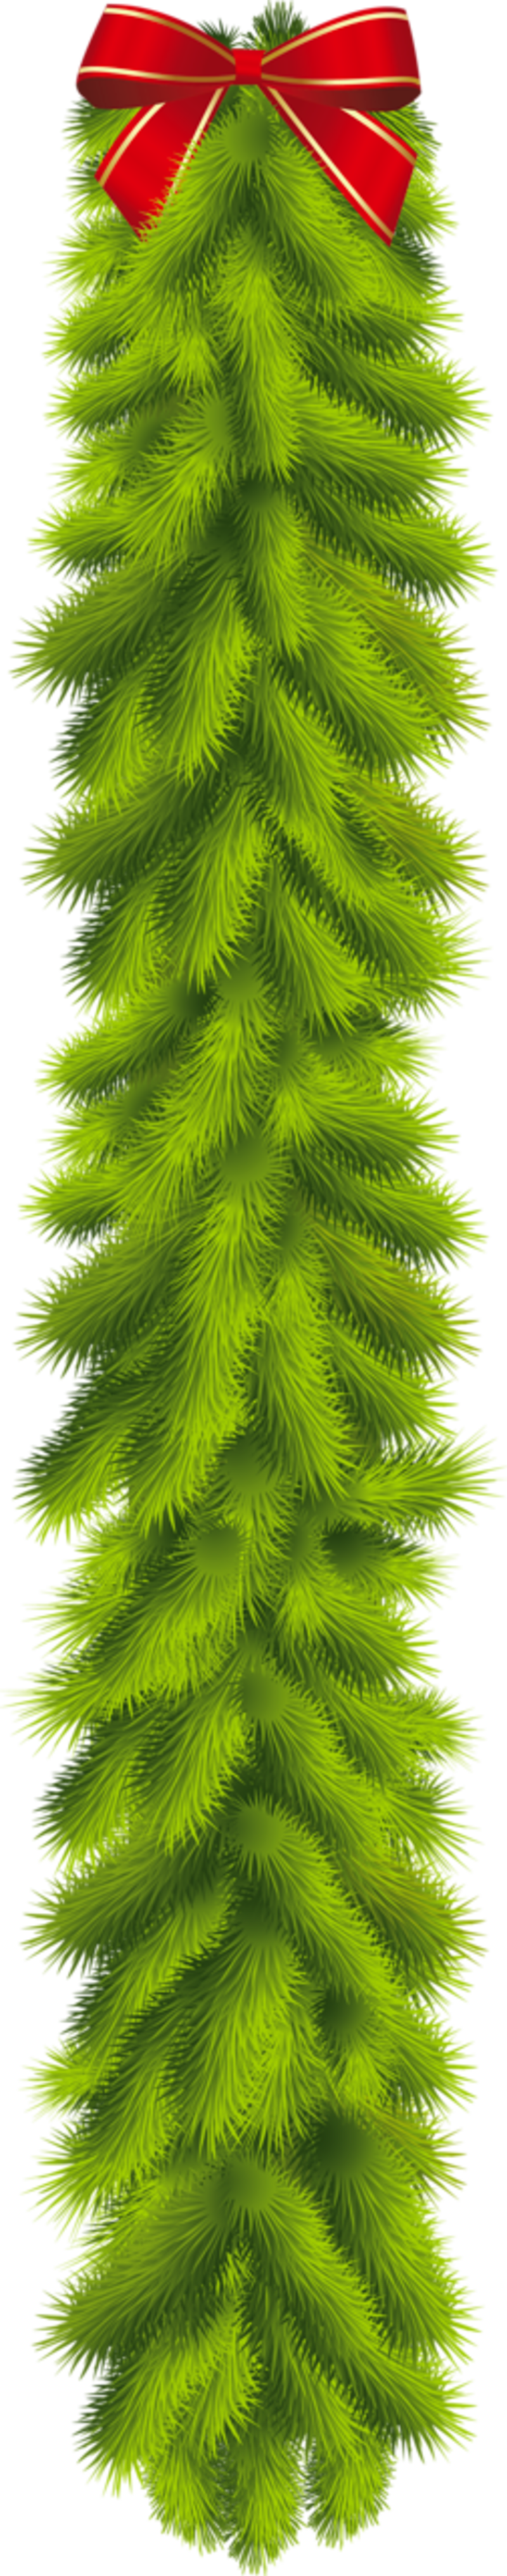 Transparent_Christmas_Pine_Garland_with_Red_Bow_Clipart.png